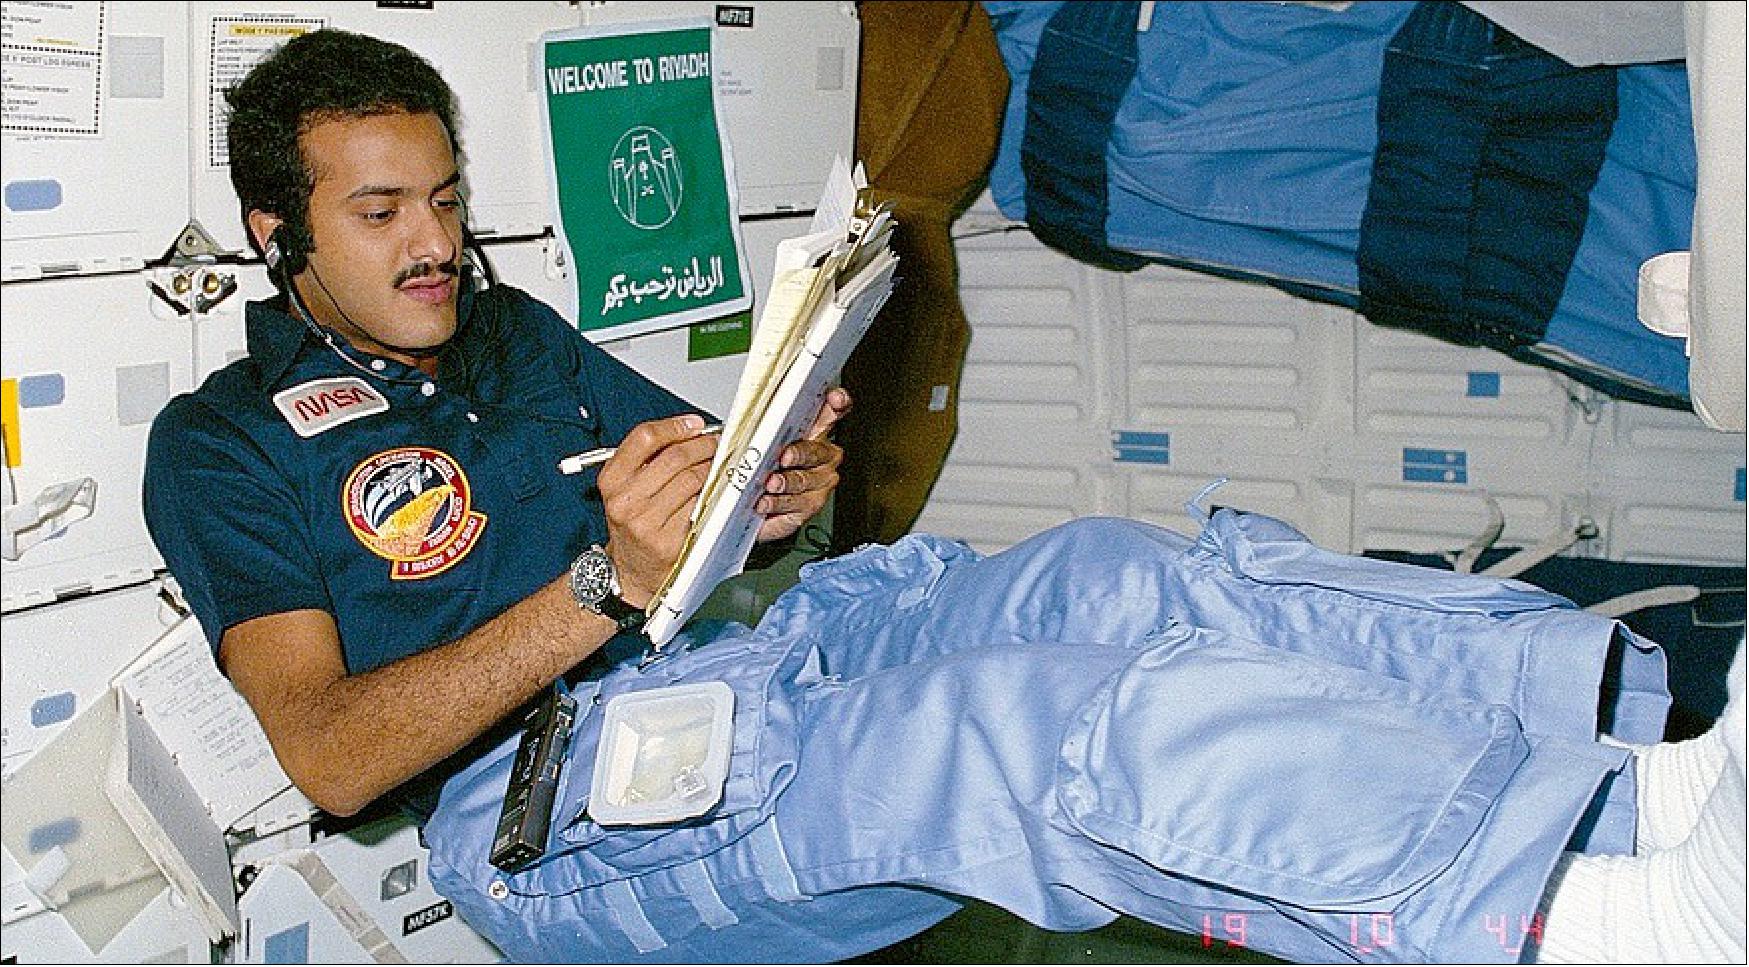 Figure 5: Sultan bin Salman Al Saud, a member of the Saudi royal family, flew to space on a shuttle mission in 1985 and is to date the only person from Saudi Arabia to go to space (image credit: NASA)